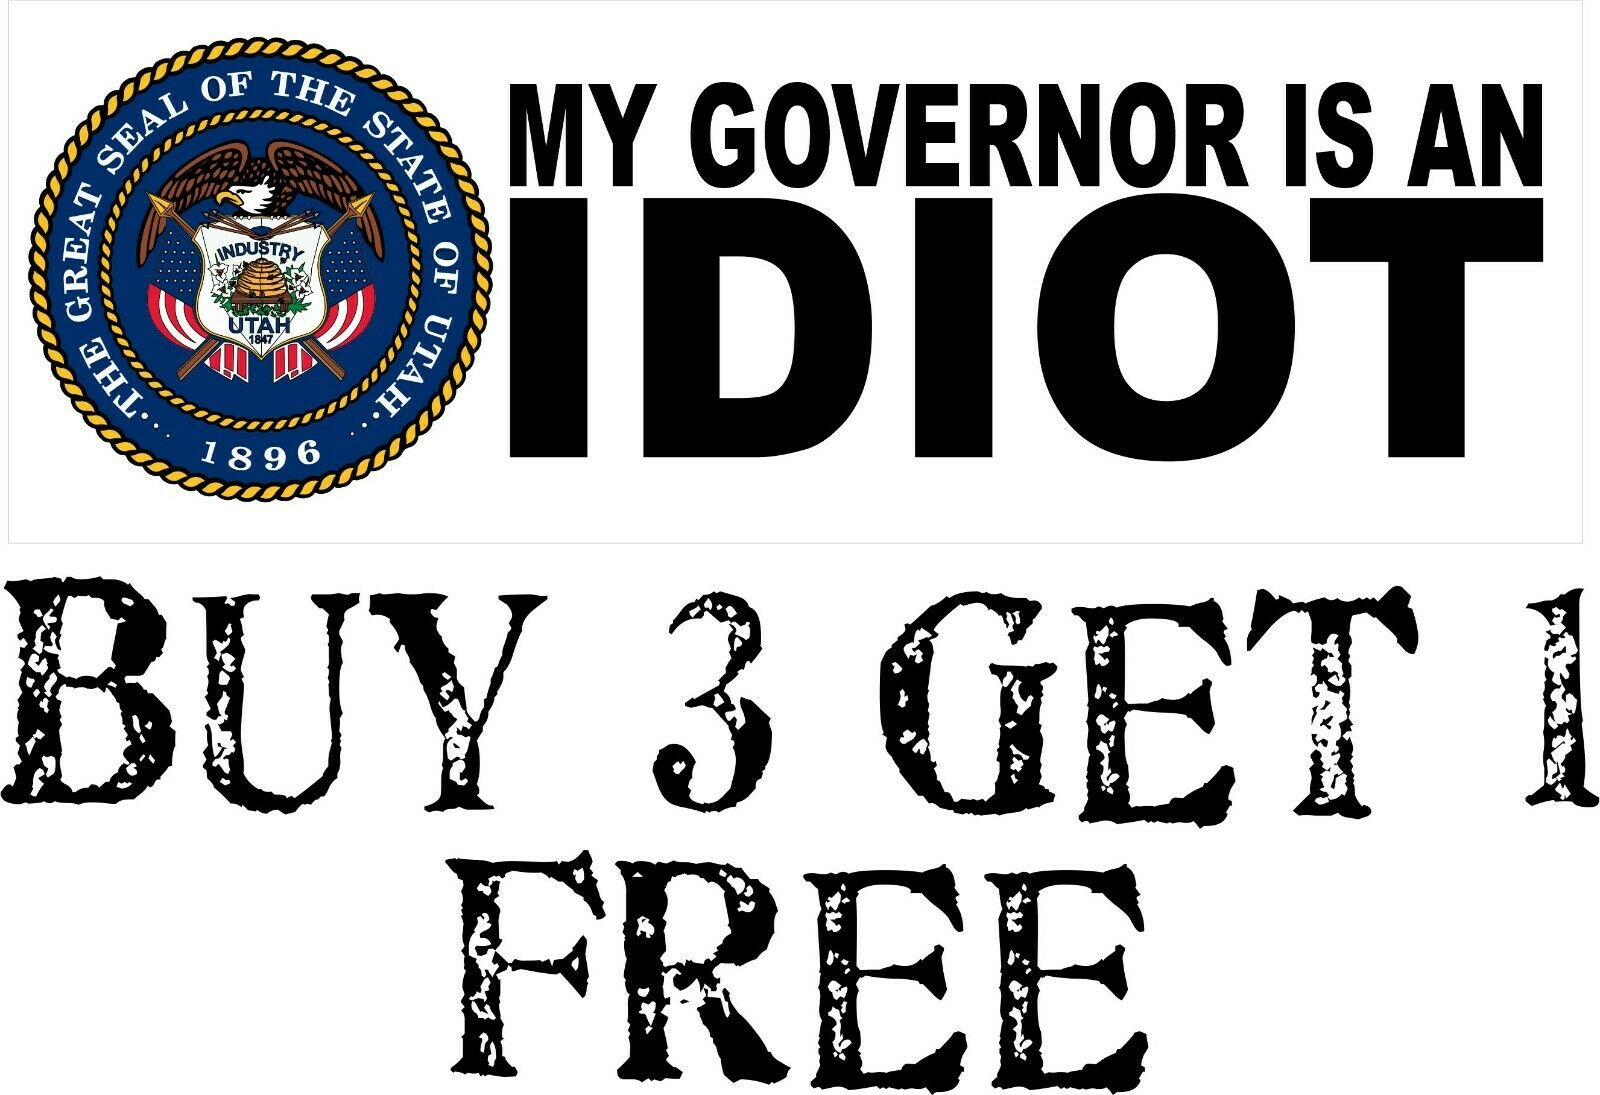 My governor is an idiot bumper sticker - State of UTAH Version - 8.7" x 3" - Powercall Sirens LLC